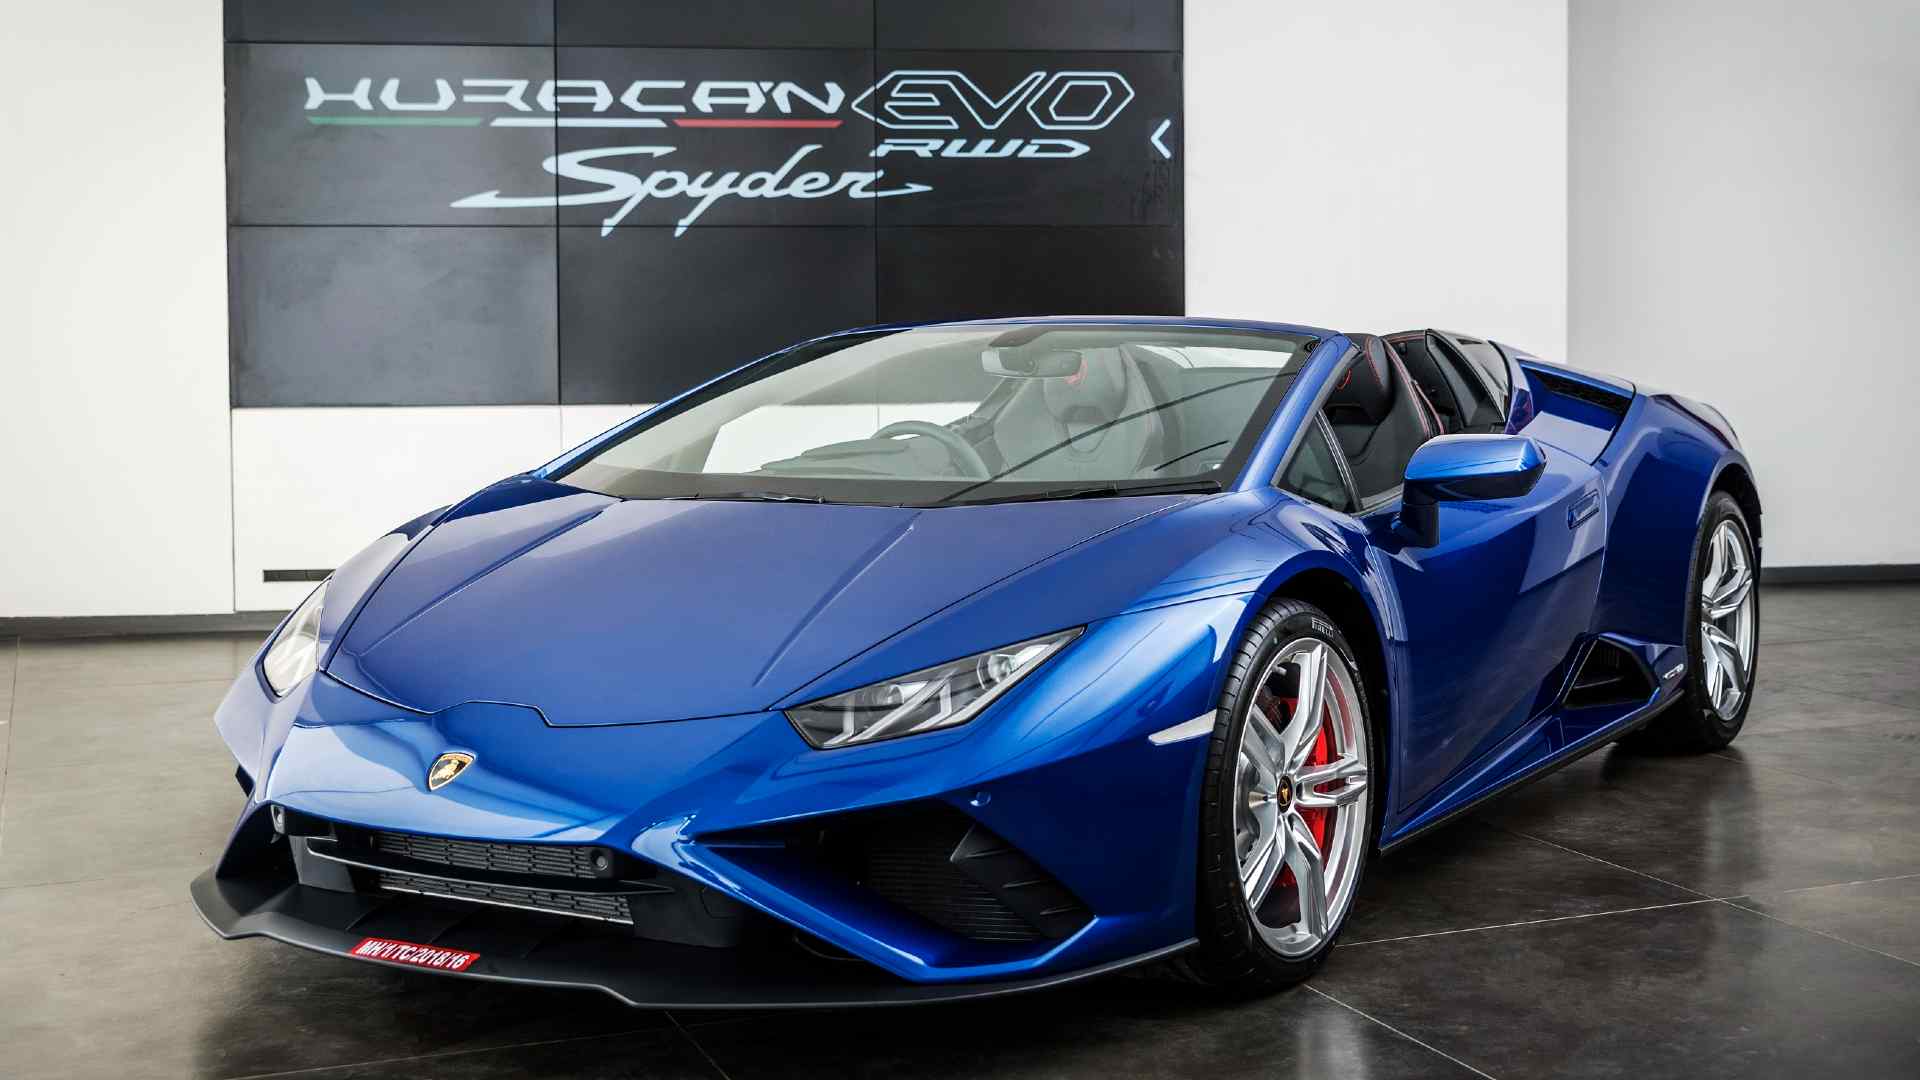 Lamborghini Huracán Spyder - Technical Specifications, Pictures